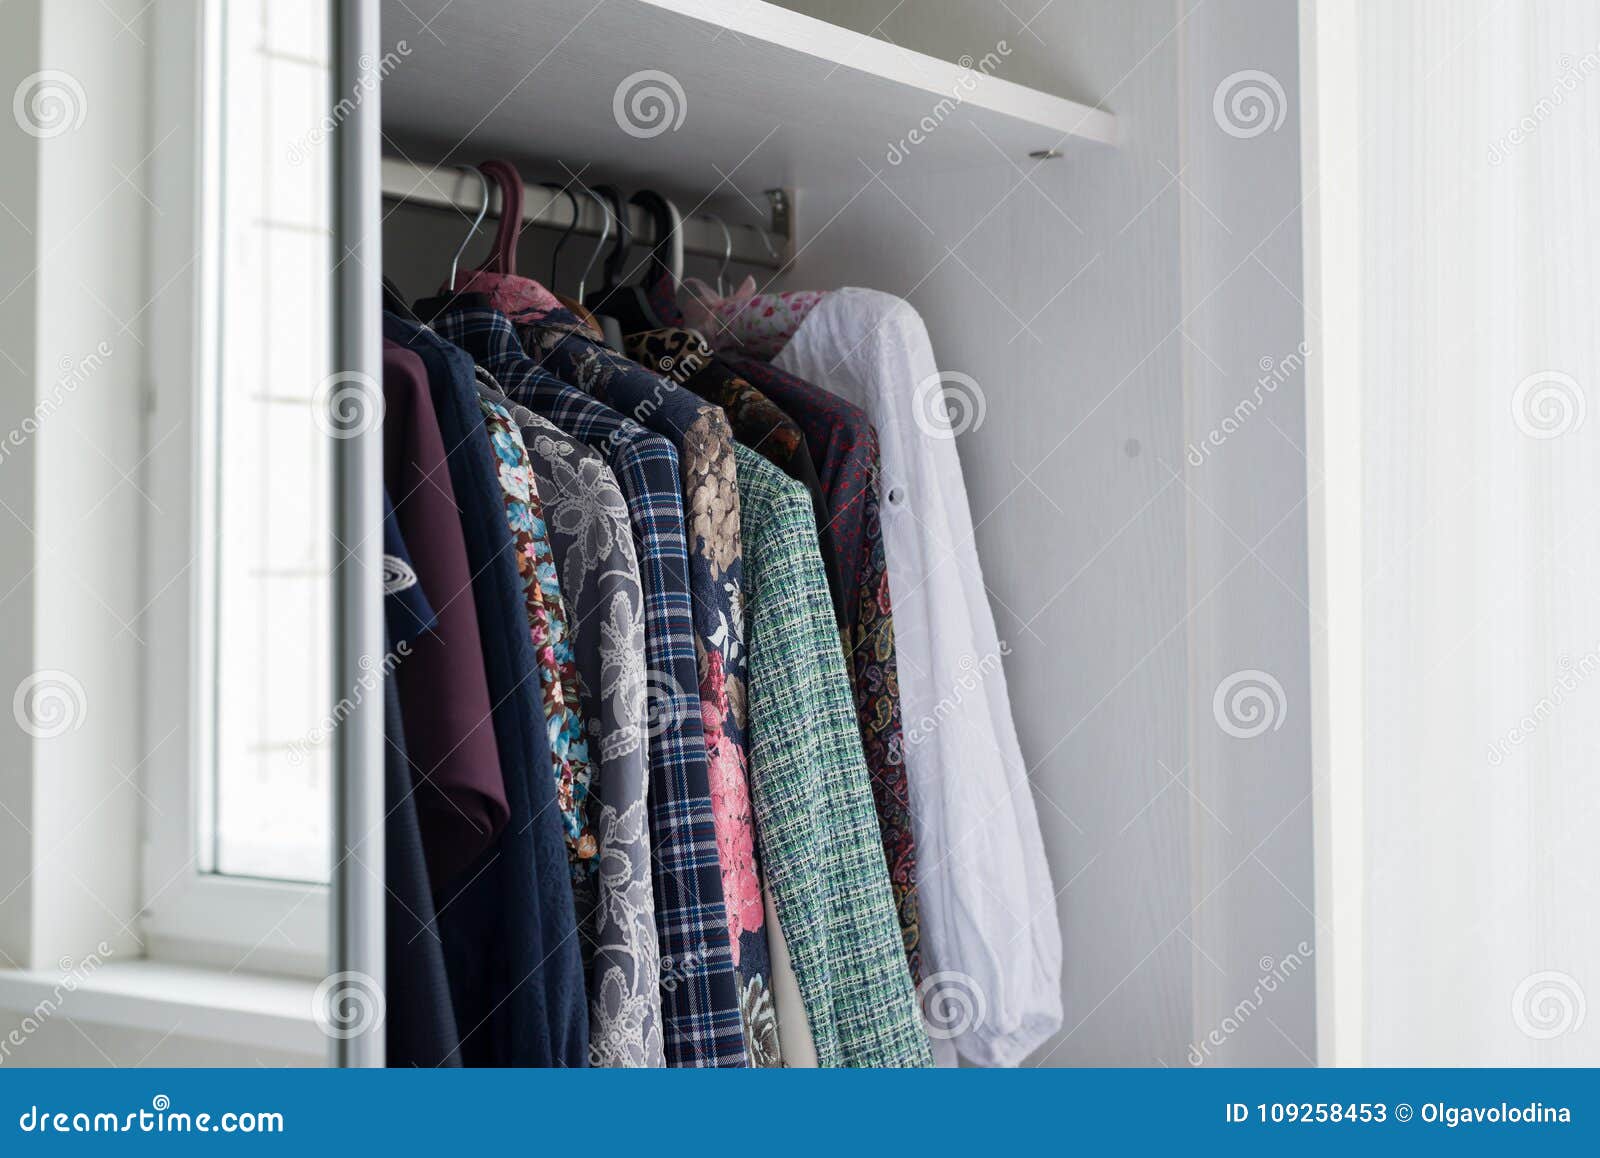 Women X27 S Clothes Hanging In Open White Cabinet Stock Image